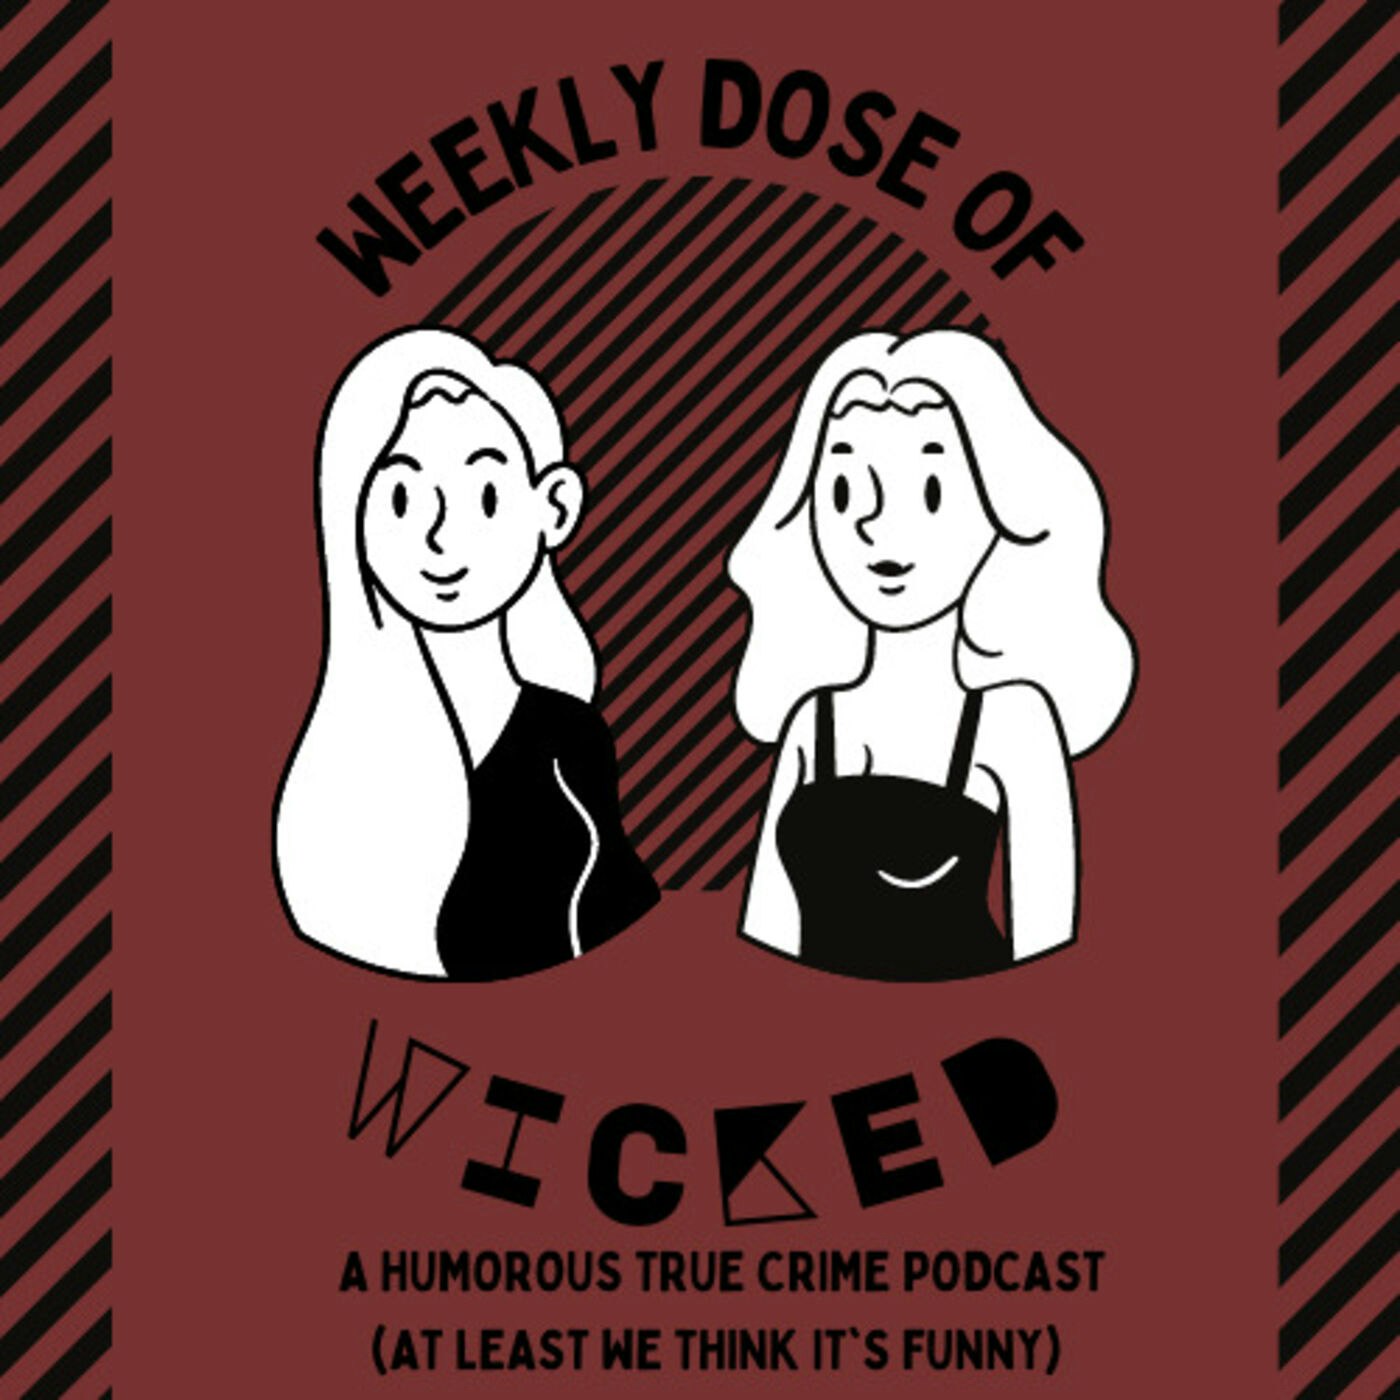 Weekly Dose of Wicked: A Humorous True Crime Podcast